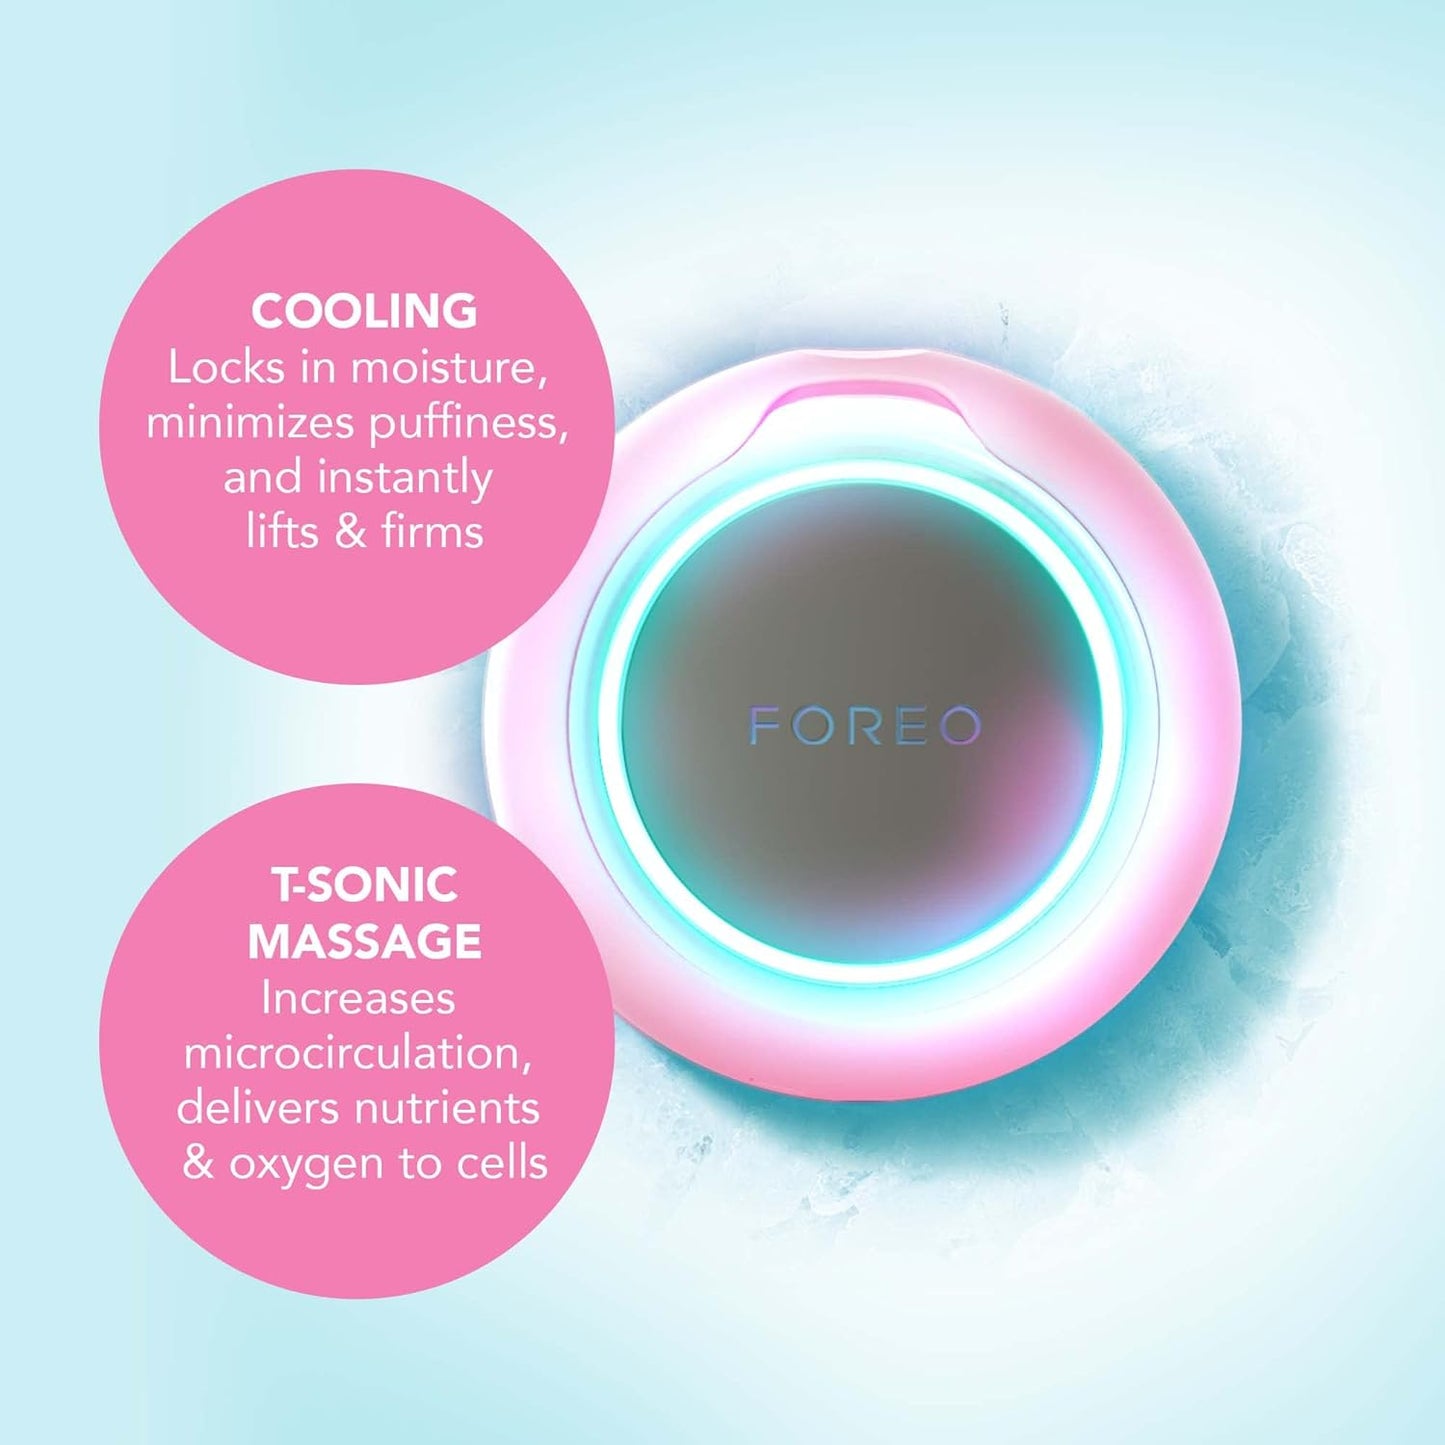 Load image into Gallery viewer, FOREO UFO Full Facial LED Face Mask Treatment, Red Light Therapy Face Care, Korean Skincare, Thermotherapy, Cryotherapy, Face Massager, Moisturiser, Increased Skin Care Absorption- Pearl Pink
